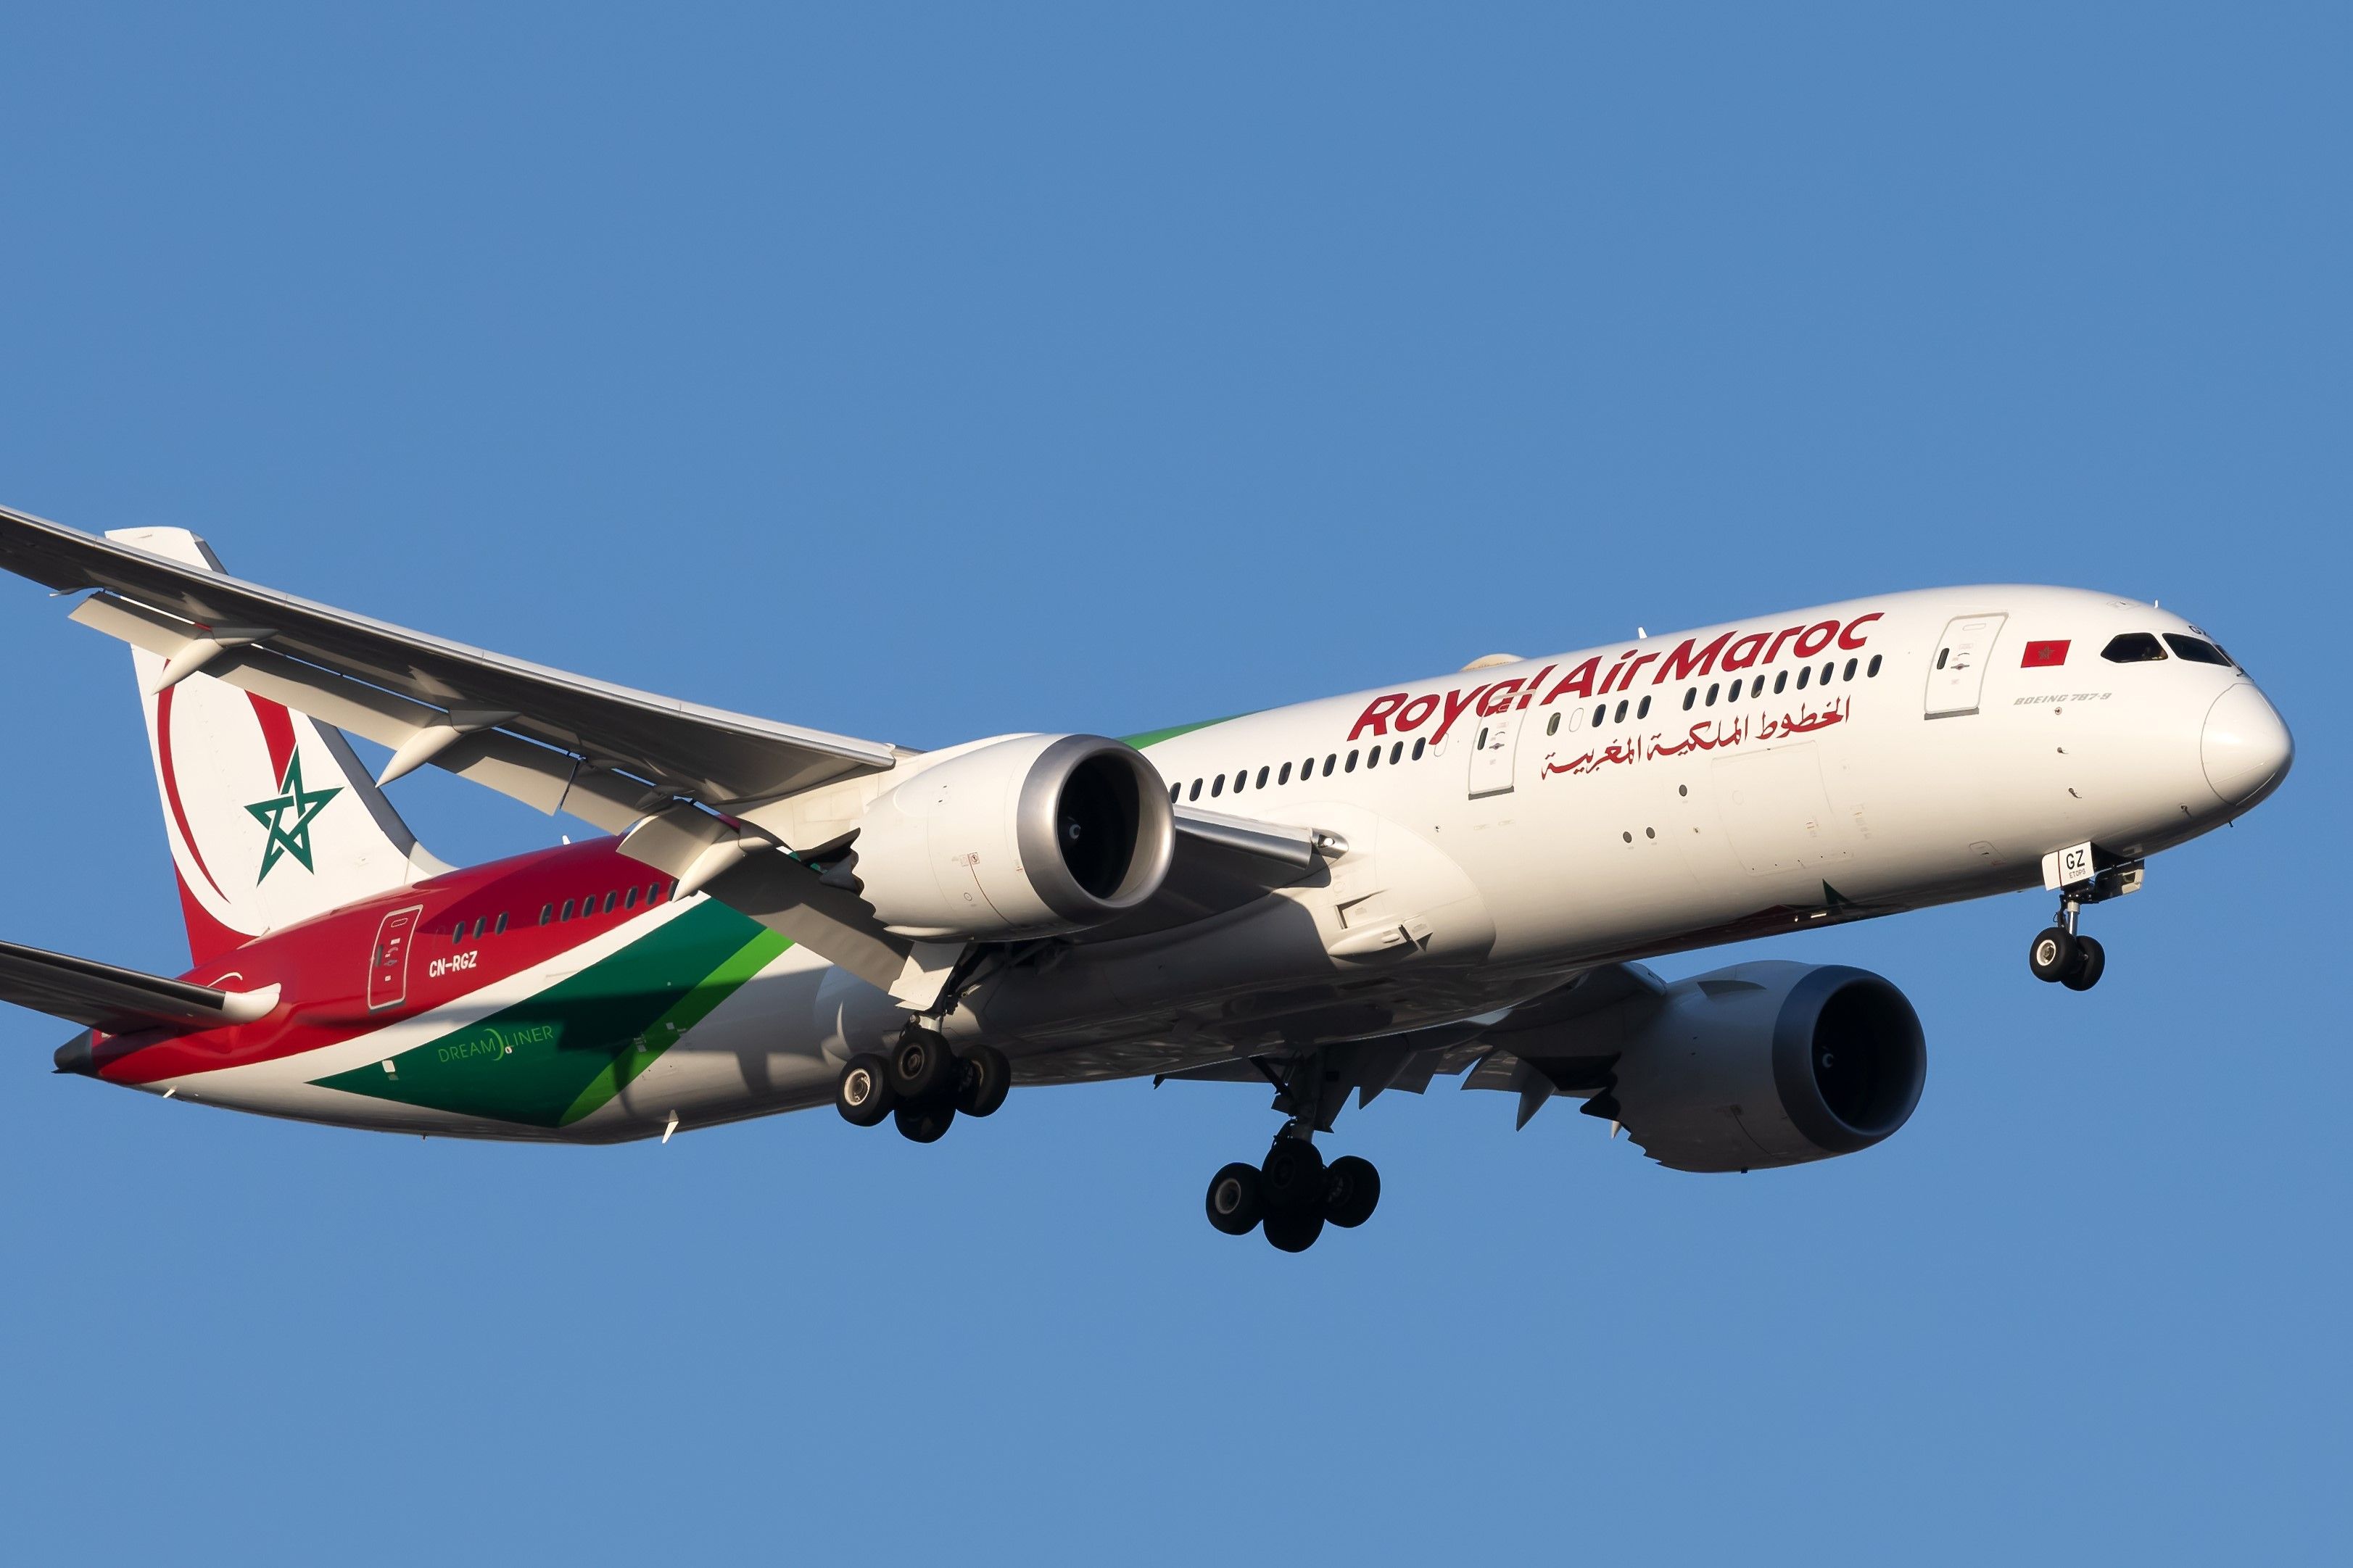 A Royal Air Maroc Boeing 787-9 Dreamliner flying in the sky.